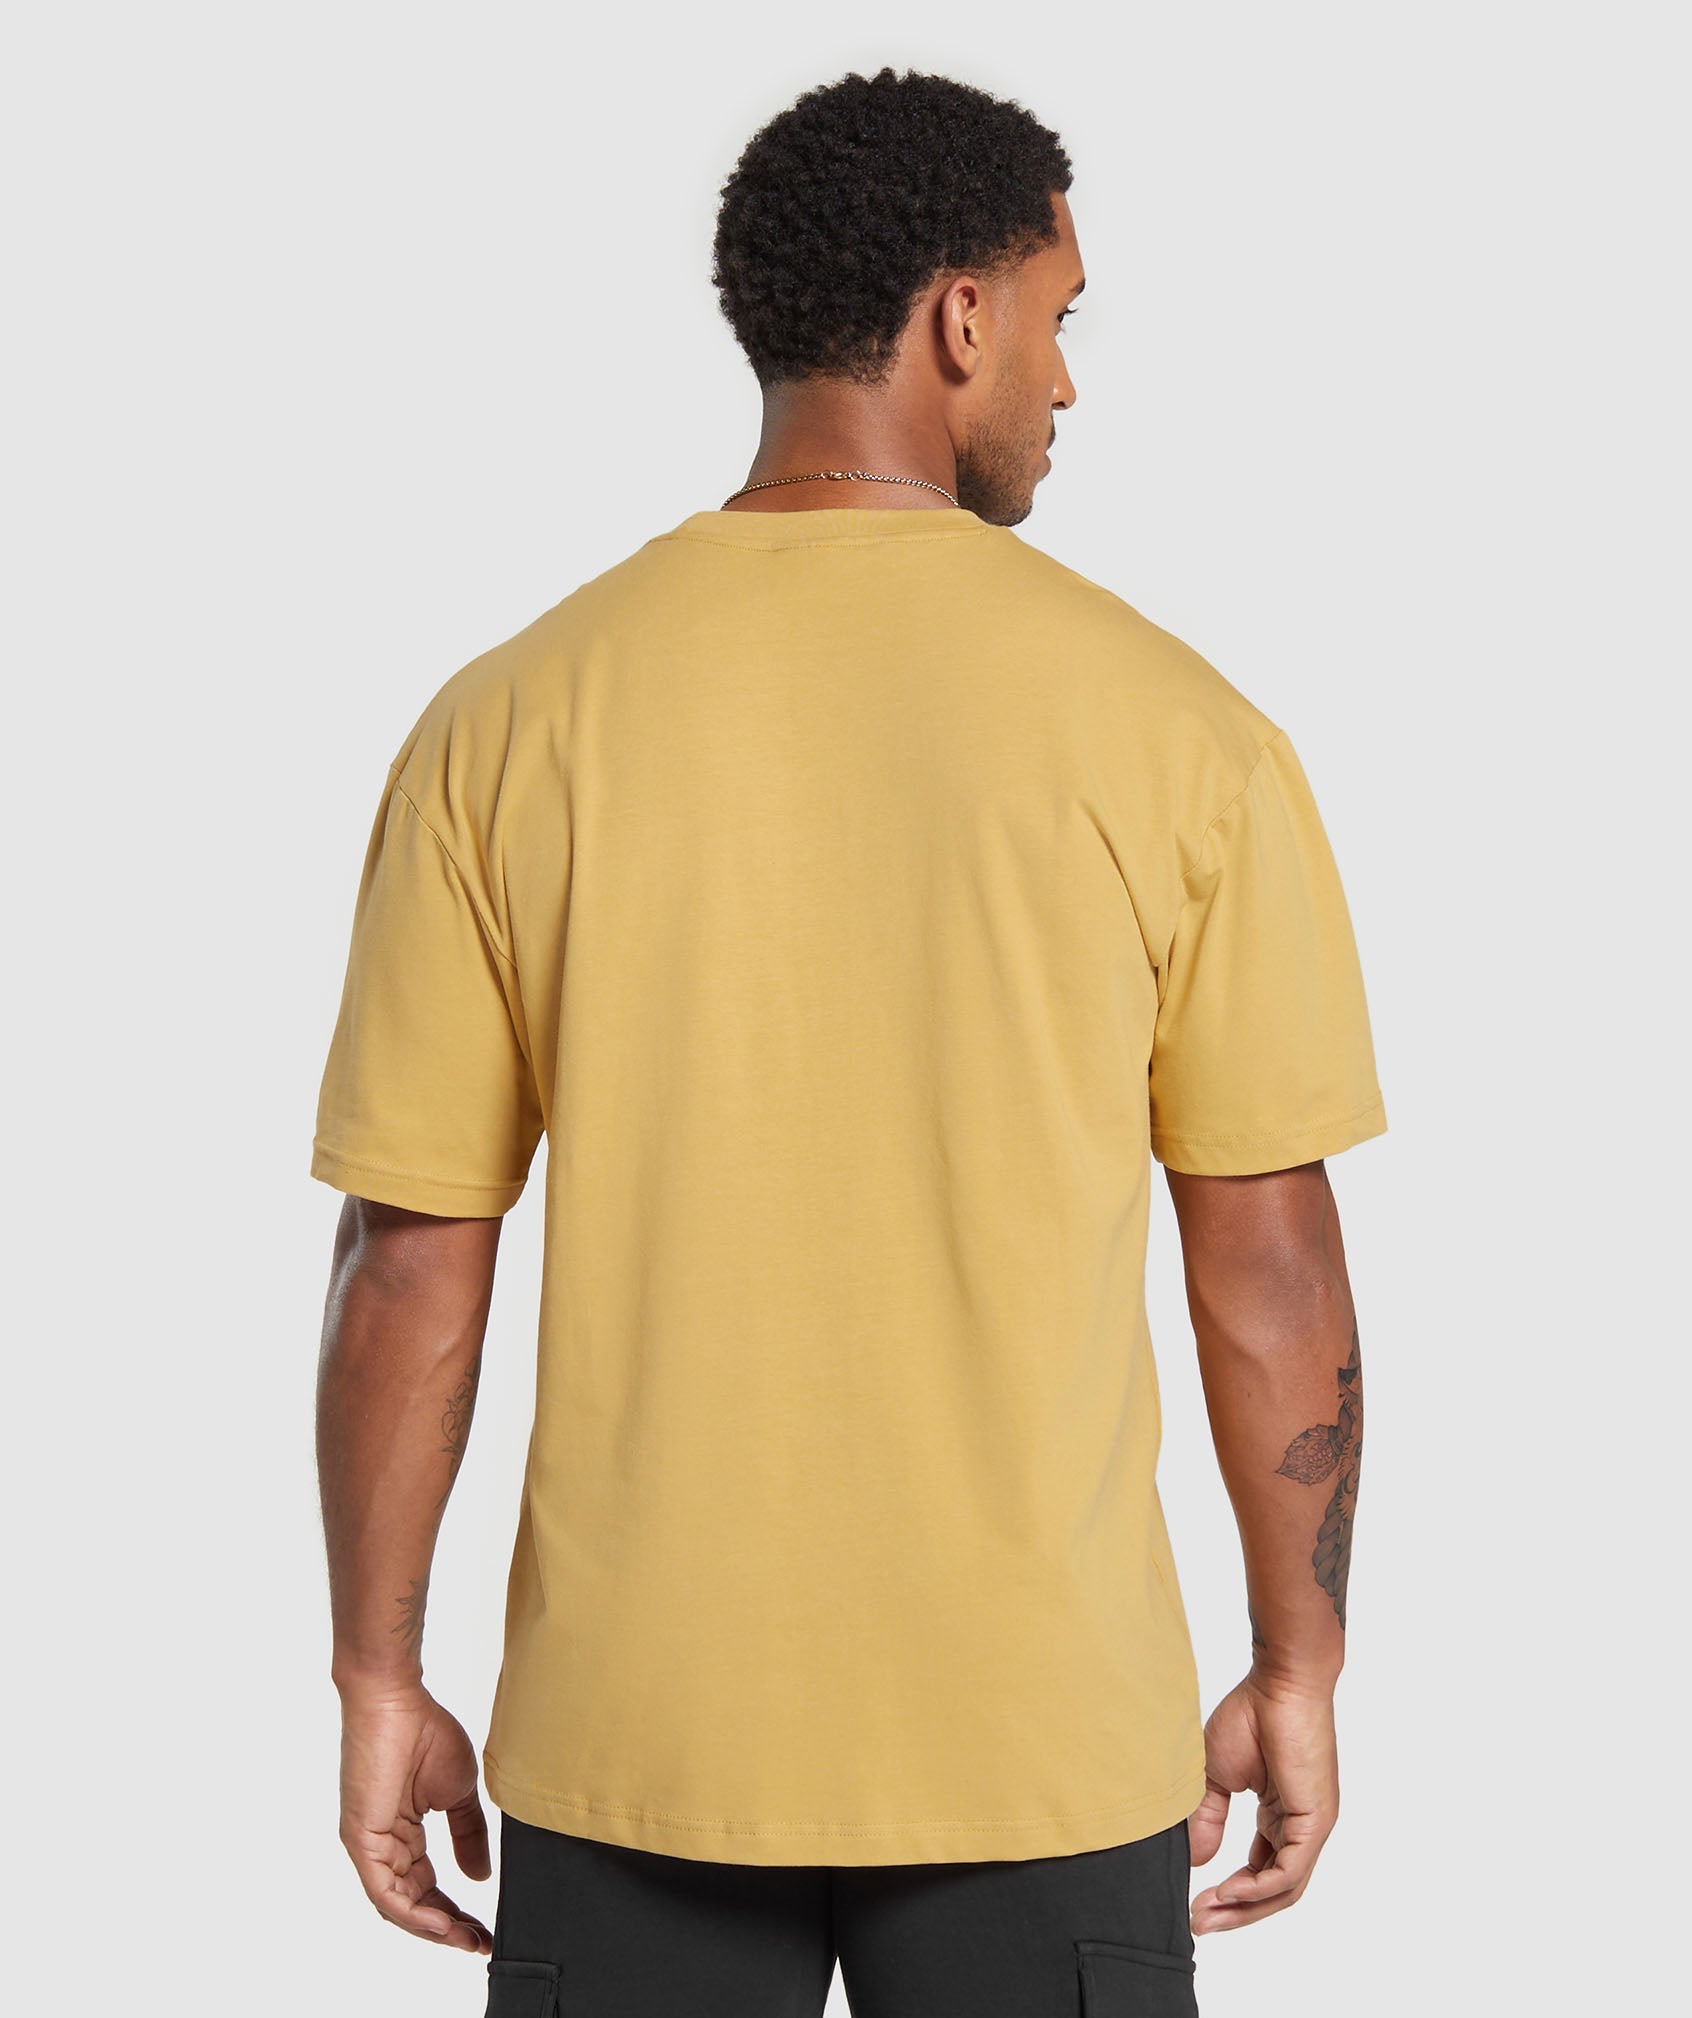 Essential Oversized T-Shirt in Rustic Yellow - view 2